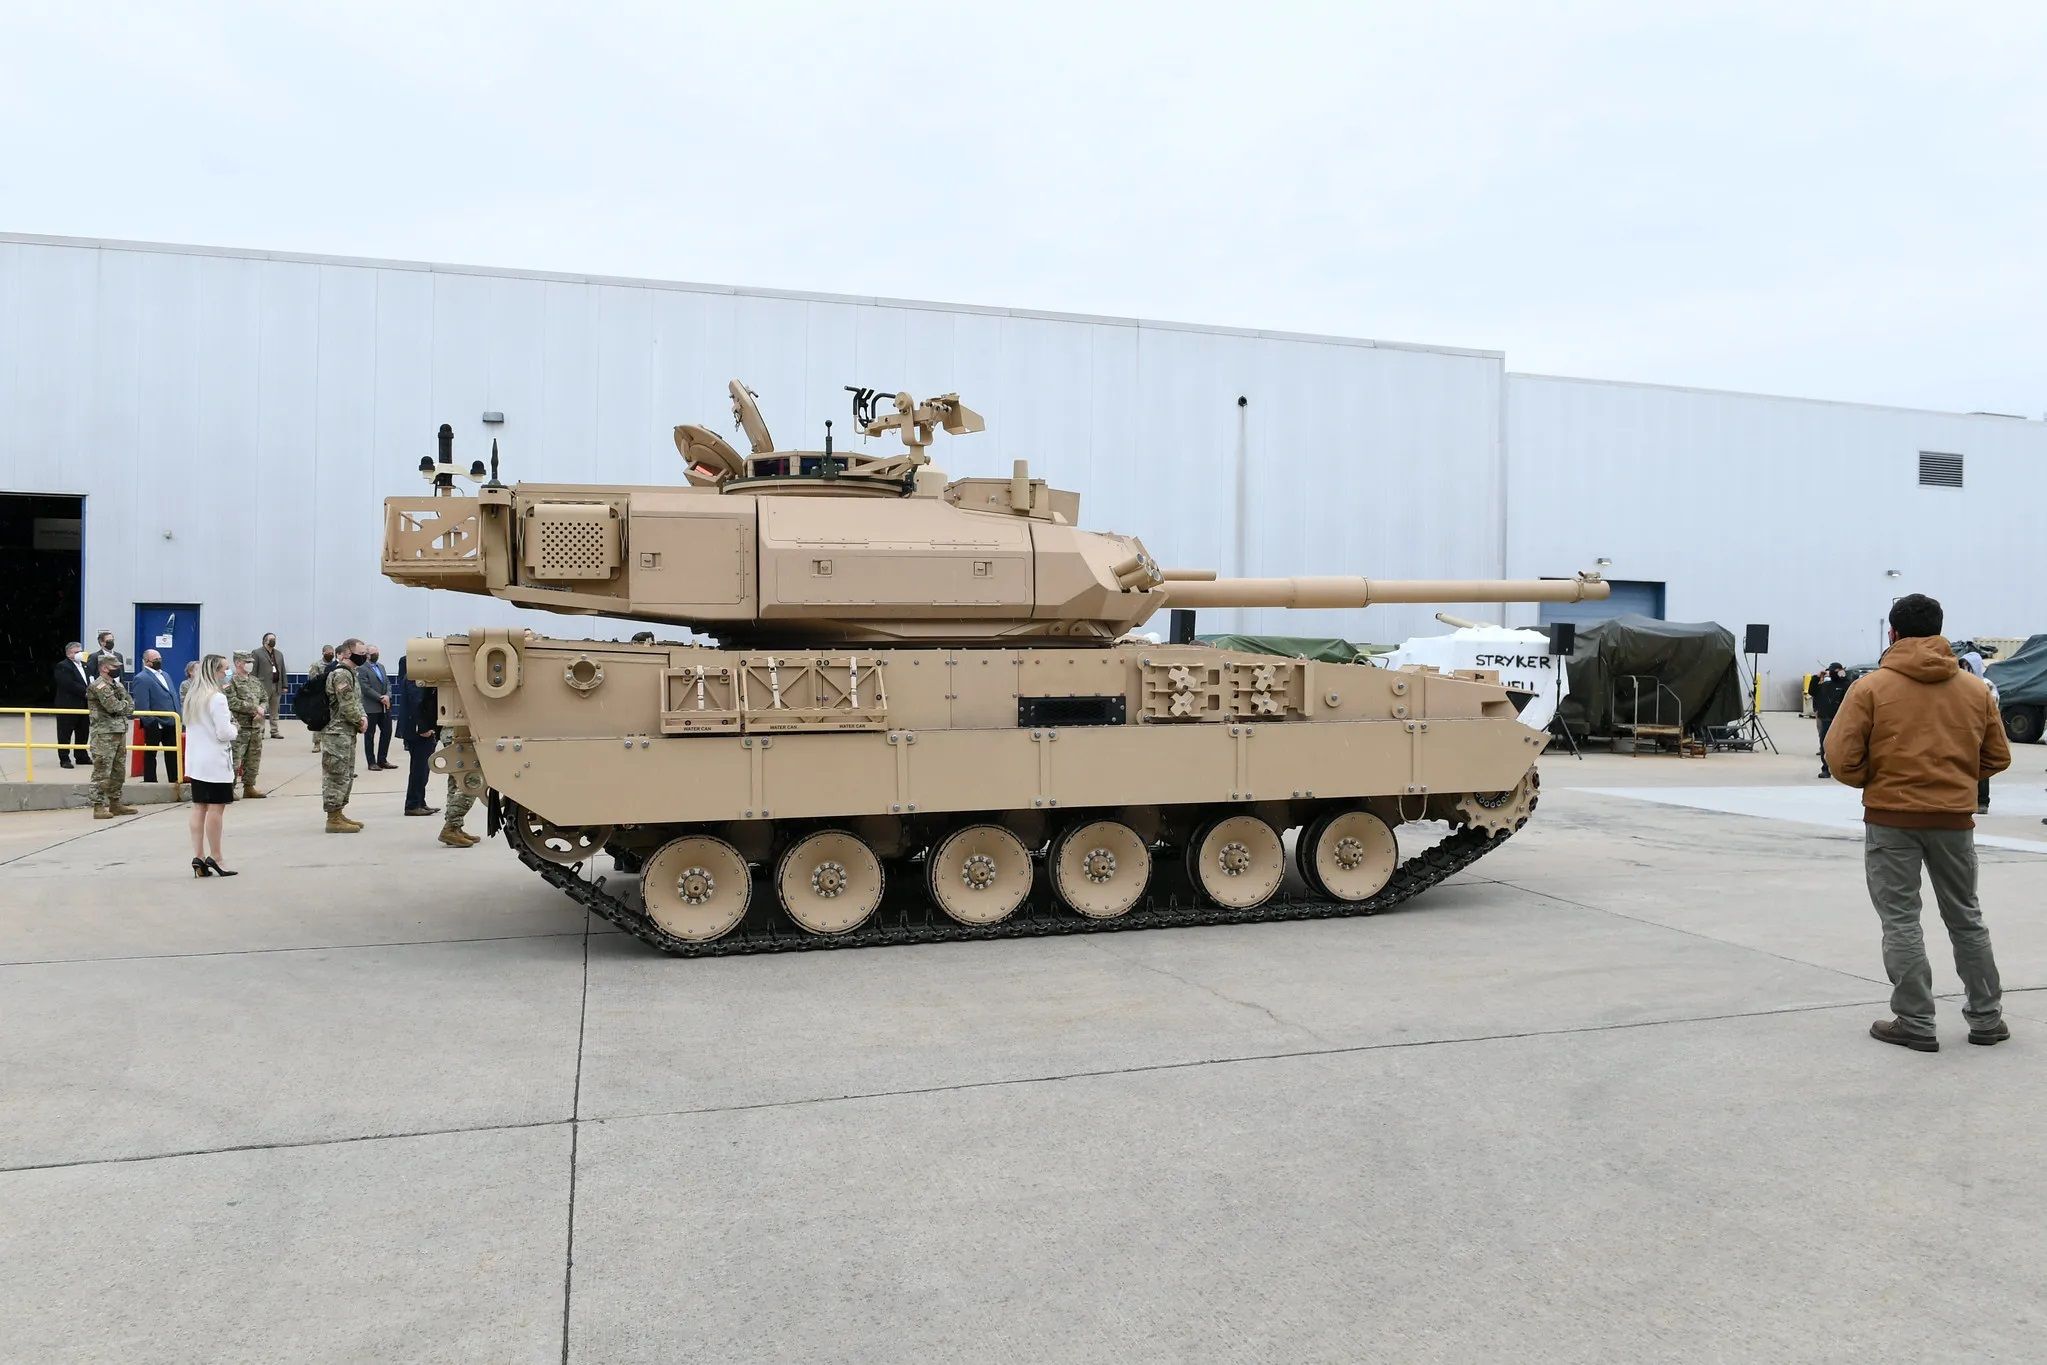 US Army will acquire GDLS